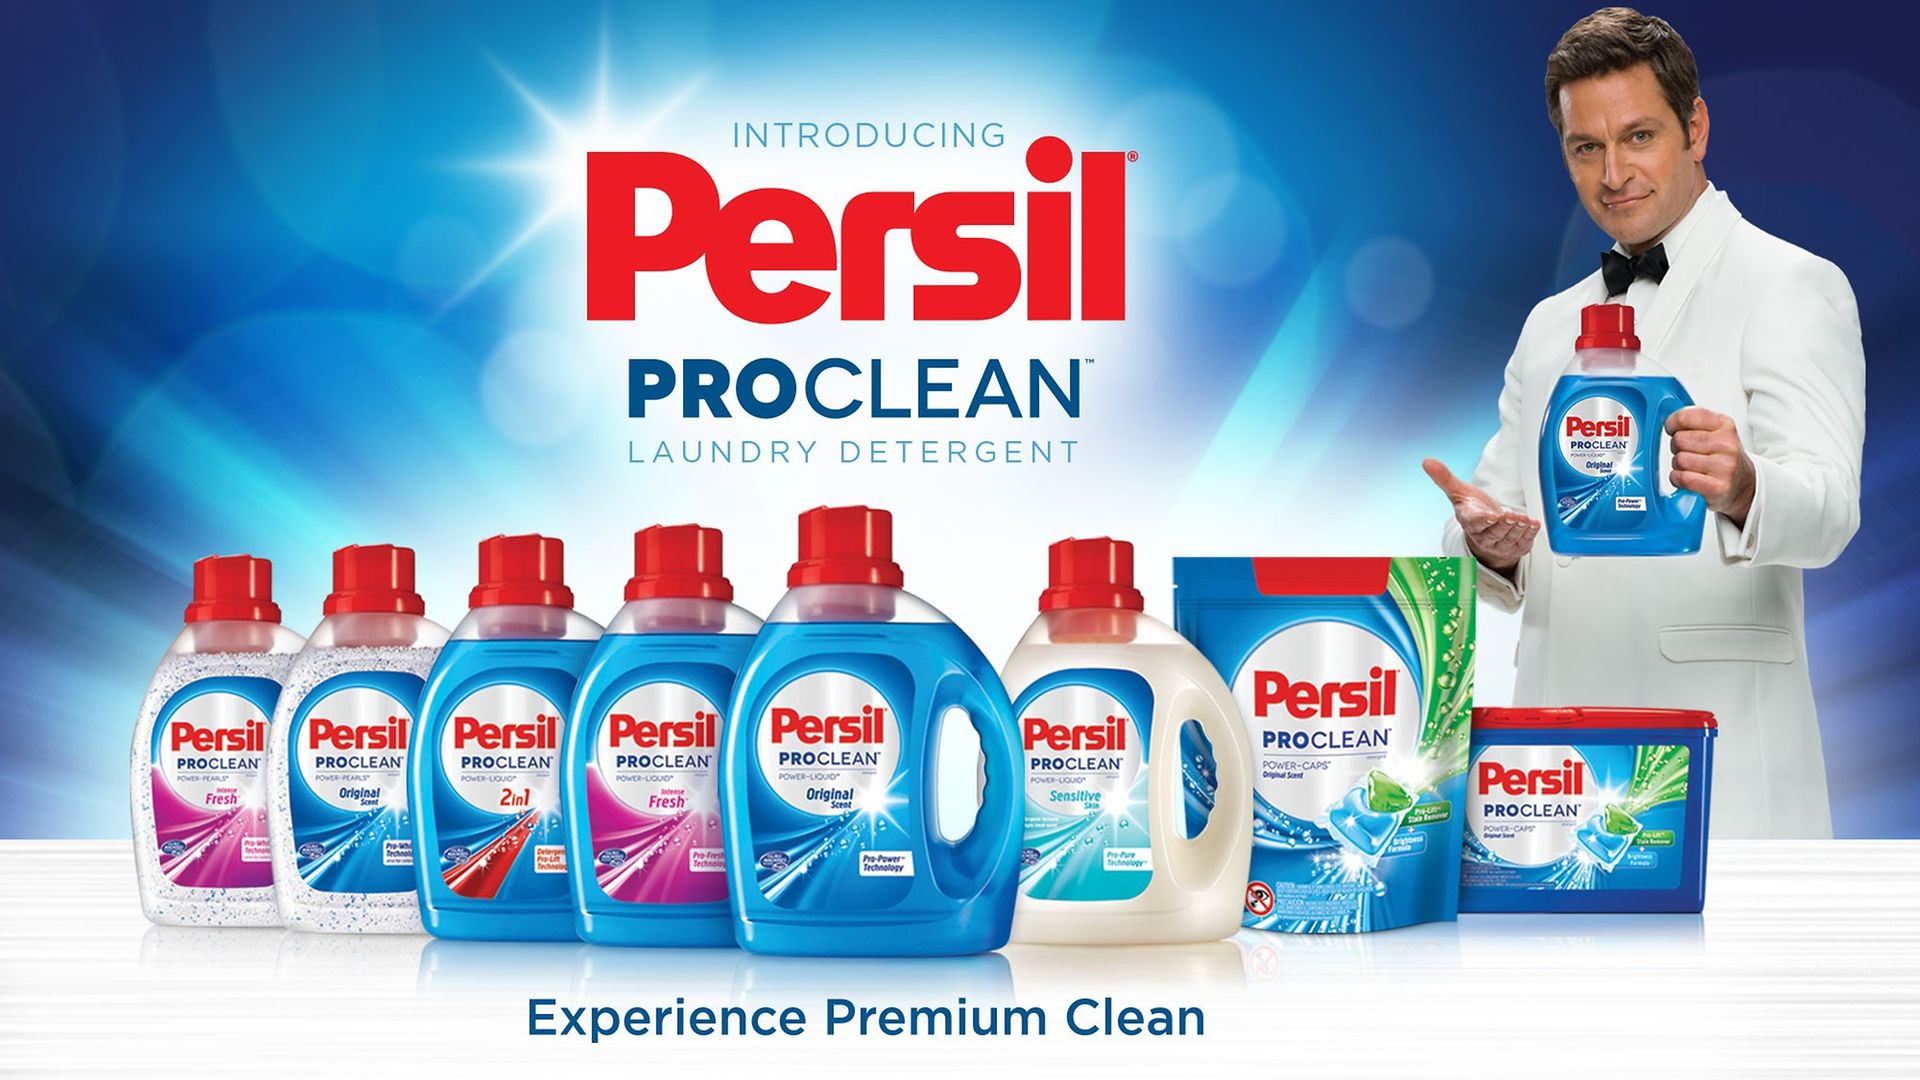 Meet “The Professional”. Played by Peter Hermann, Persil ProClean’s tuxedo-wearing, stain-fighting superhero